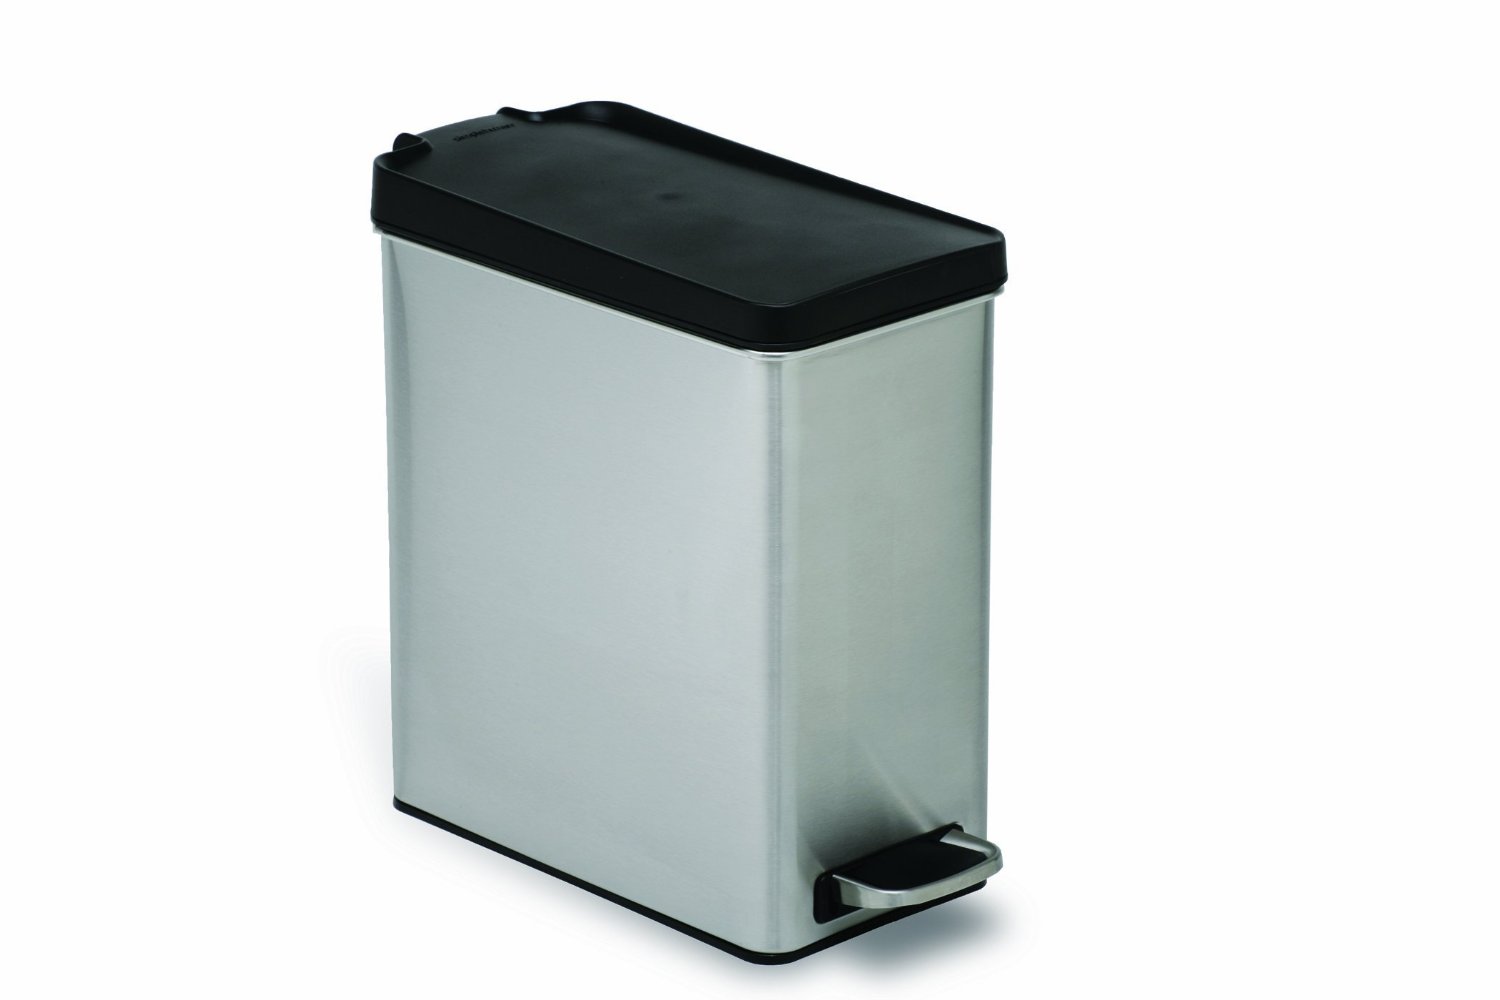 Amazon.com: Trash & Recycling: Home & Kitchen: Trash Cans, Outdoor ...